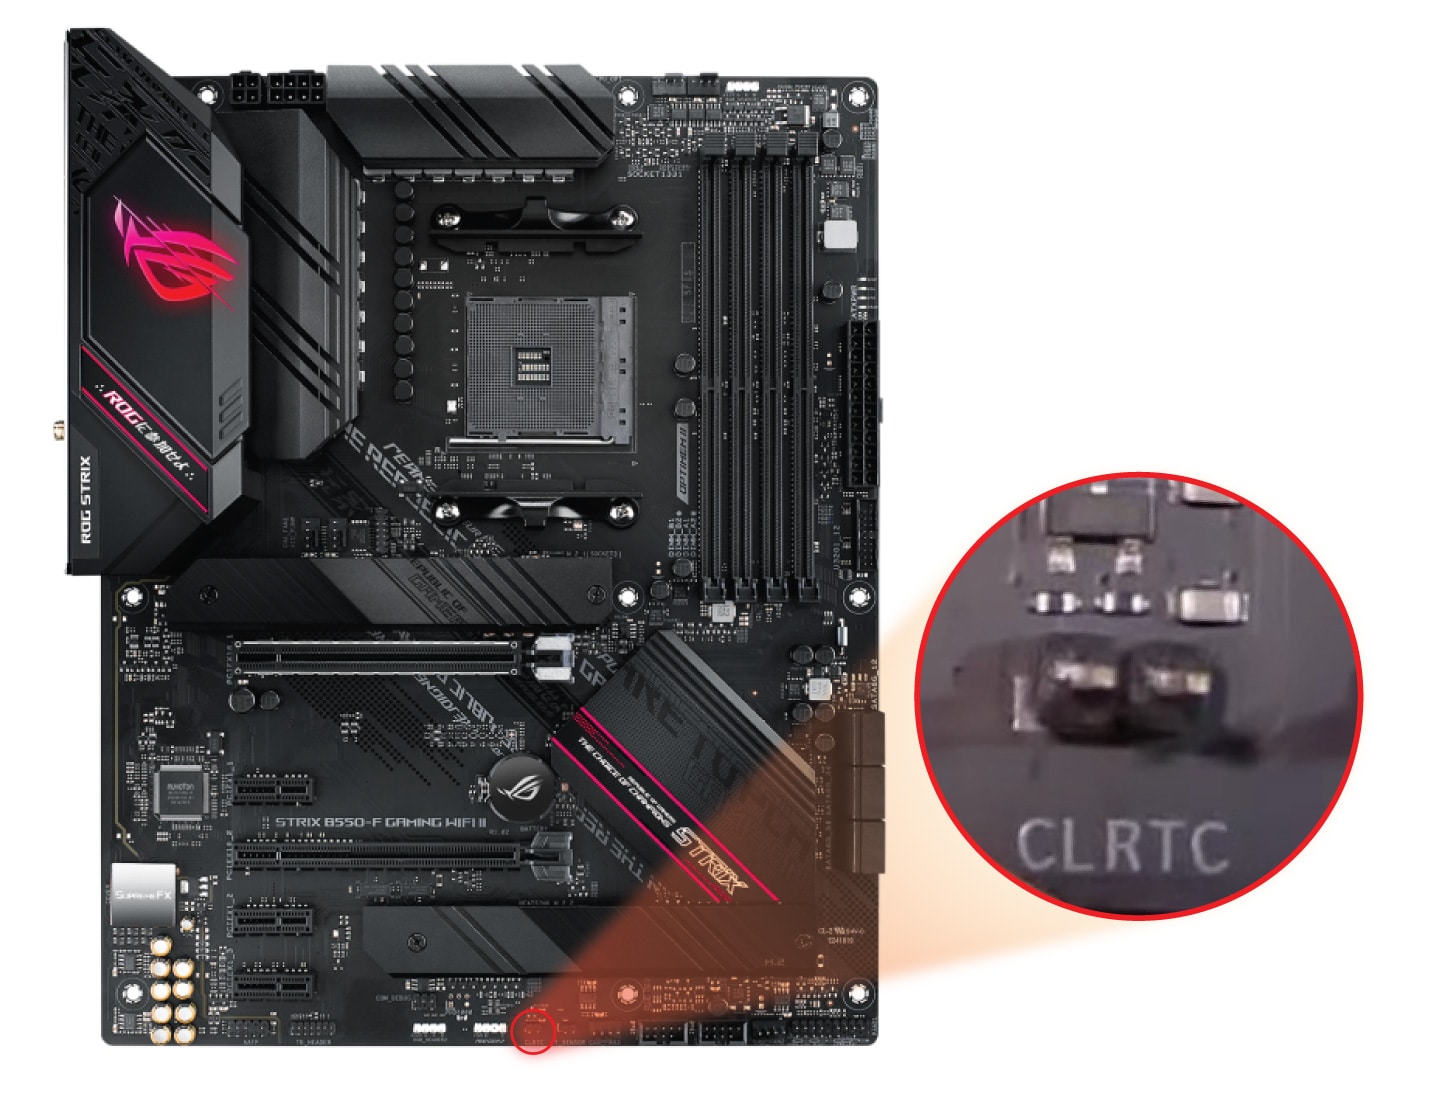 Showing CMOS jumper location on ASUS ROG STRIX B550-F GAMING (or WiFi and WiFi II).